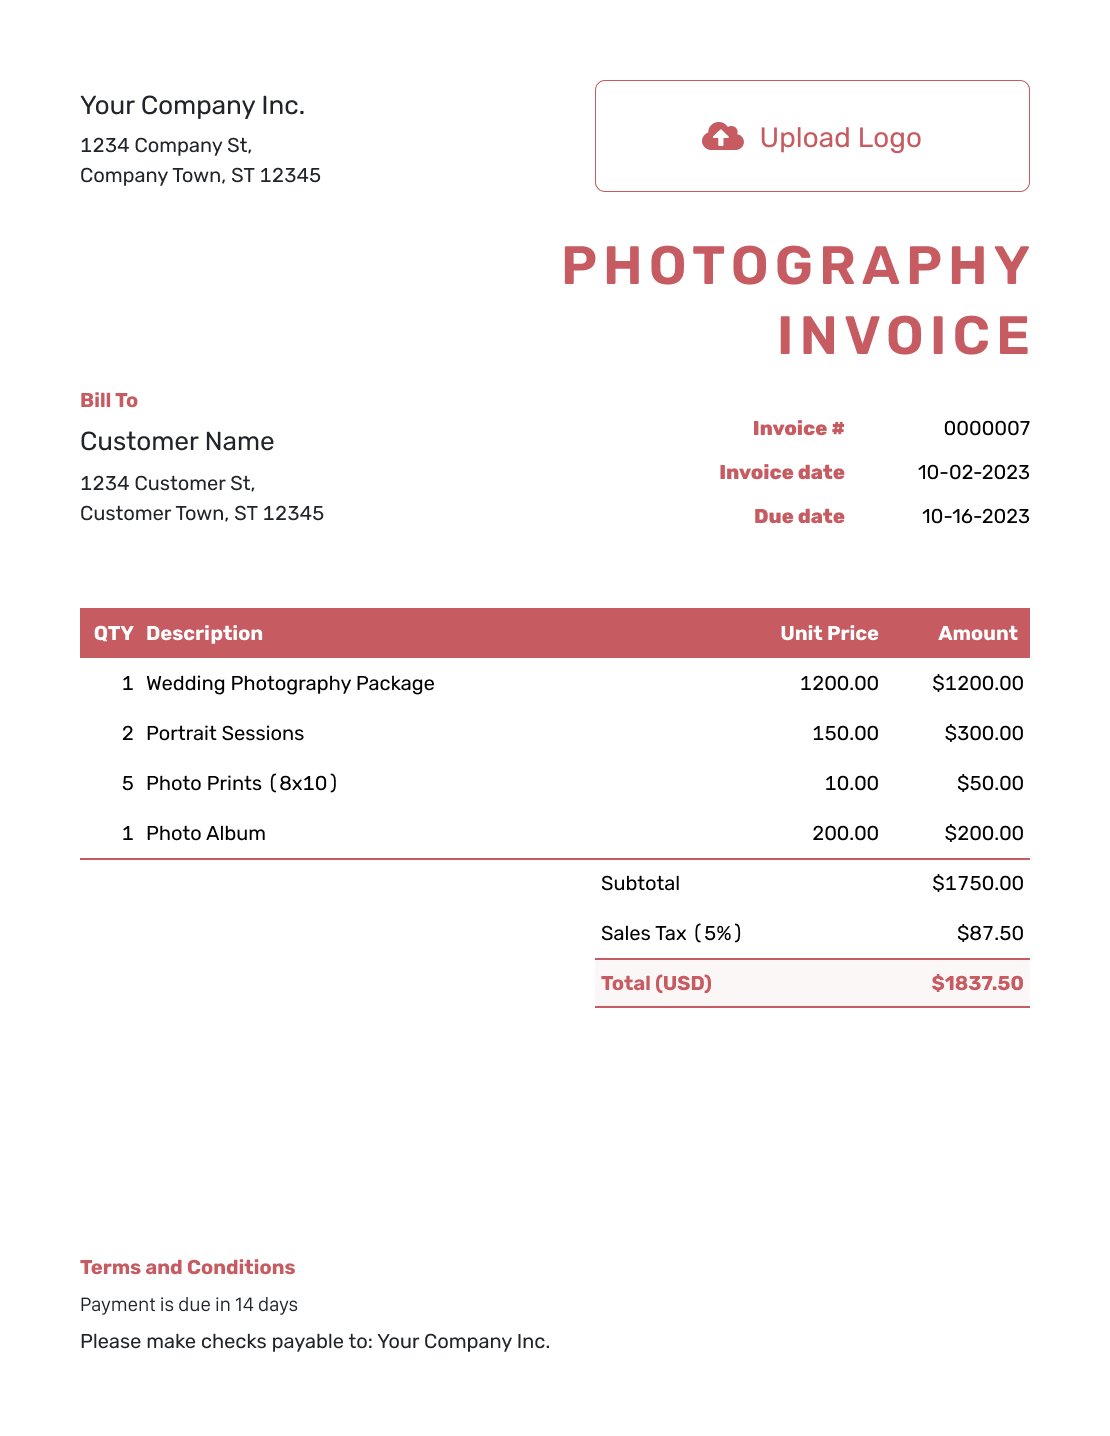 Itemized Photography Invoice Template